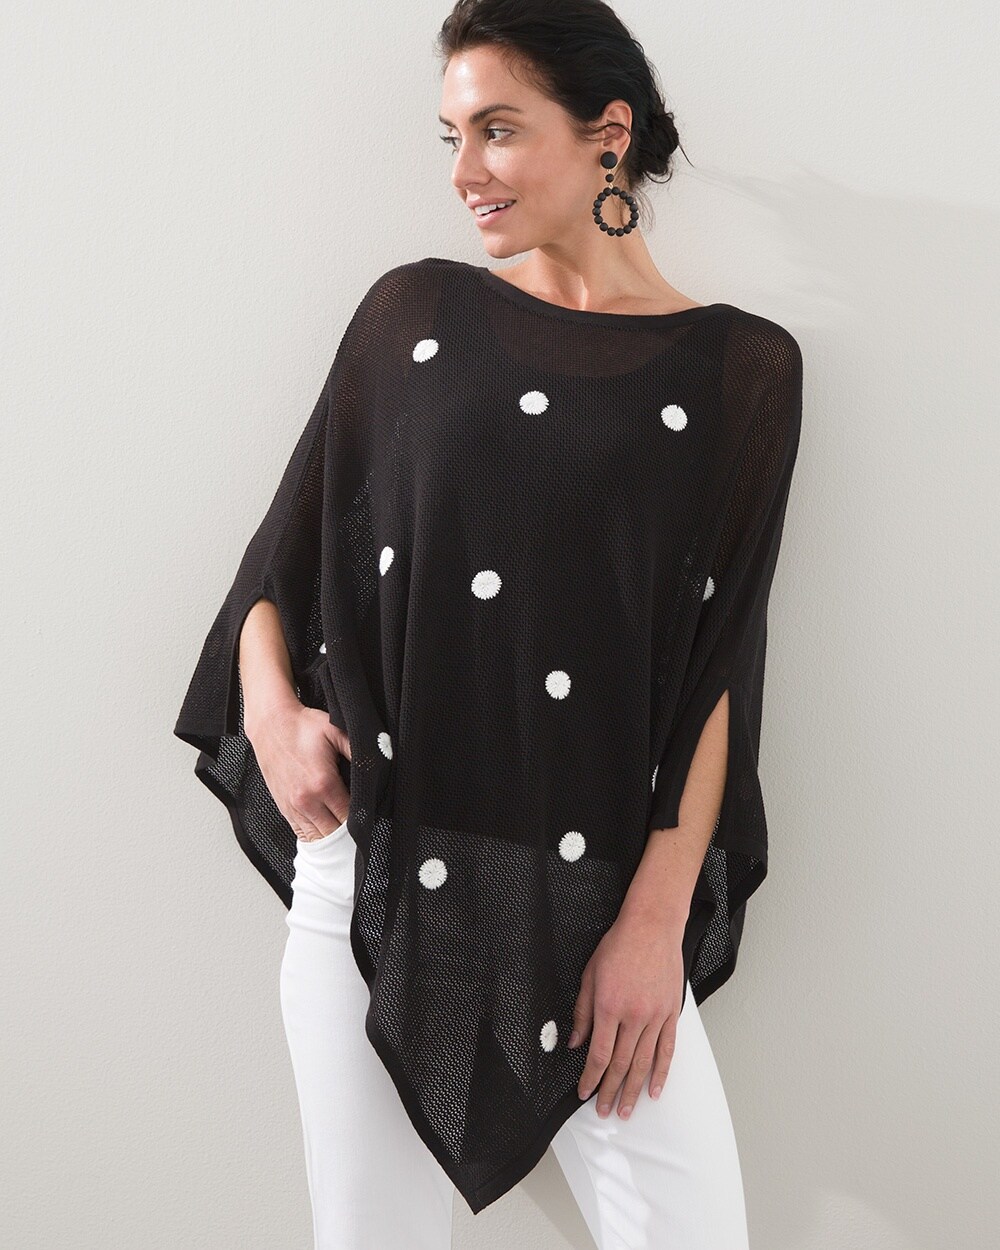 Embroidered Daisy Mesh Poncho video preview image, click to start video